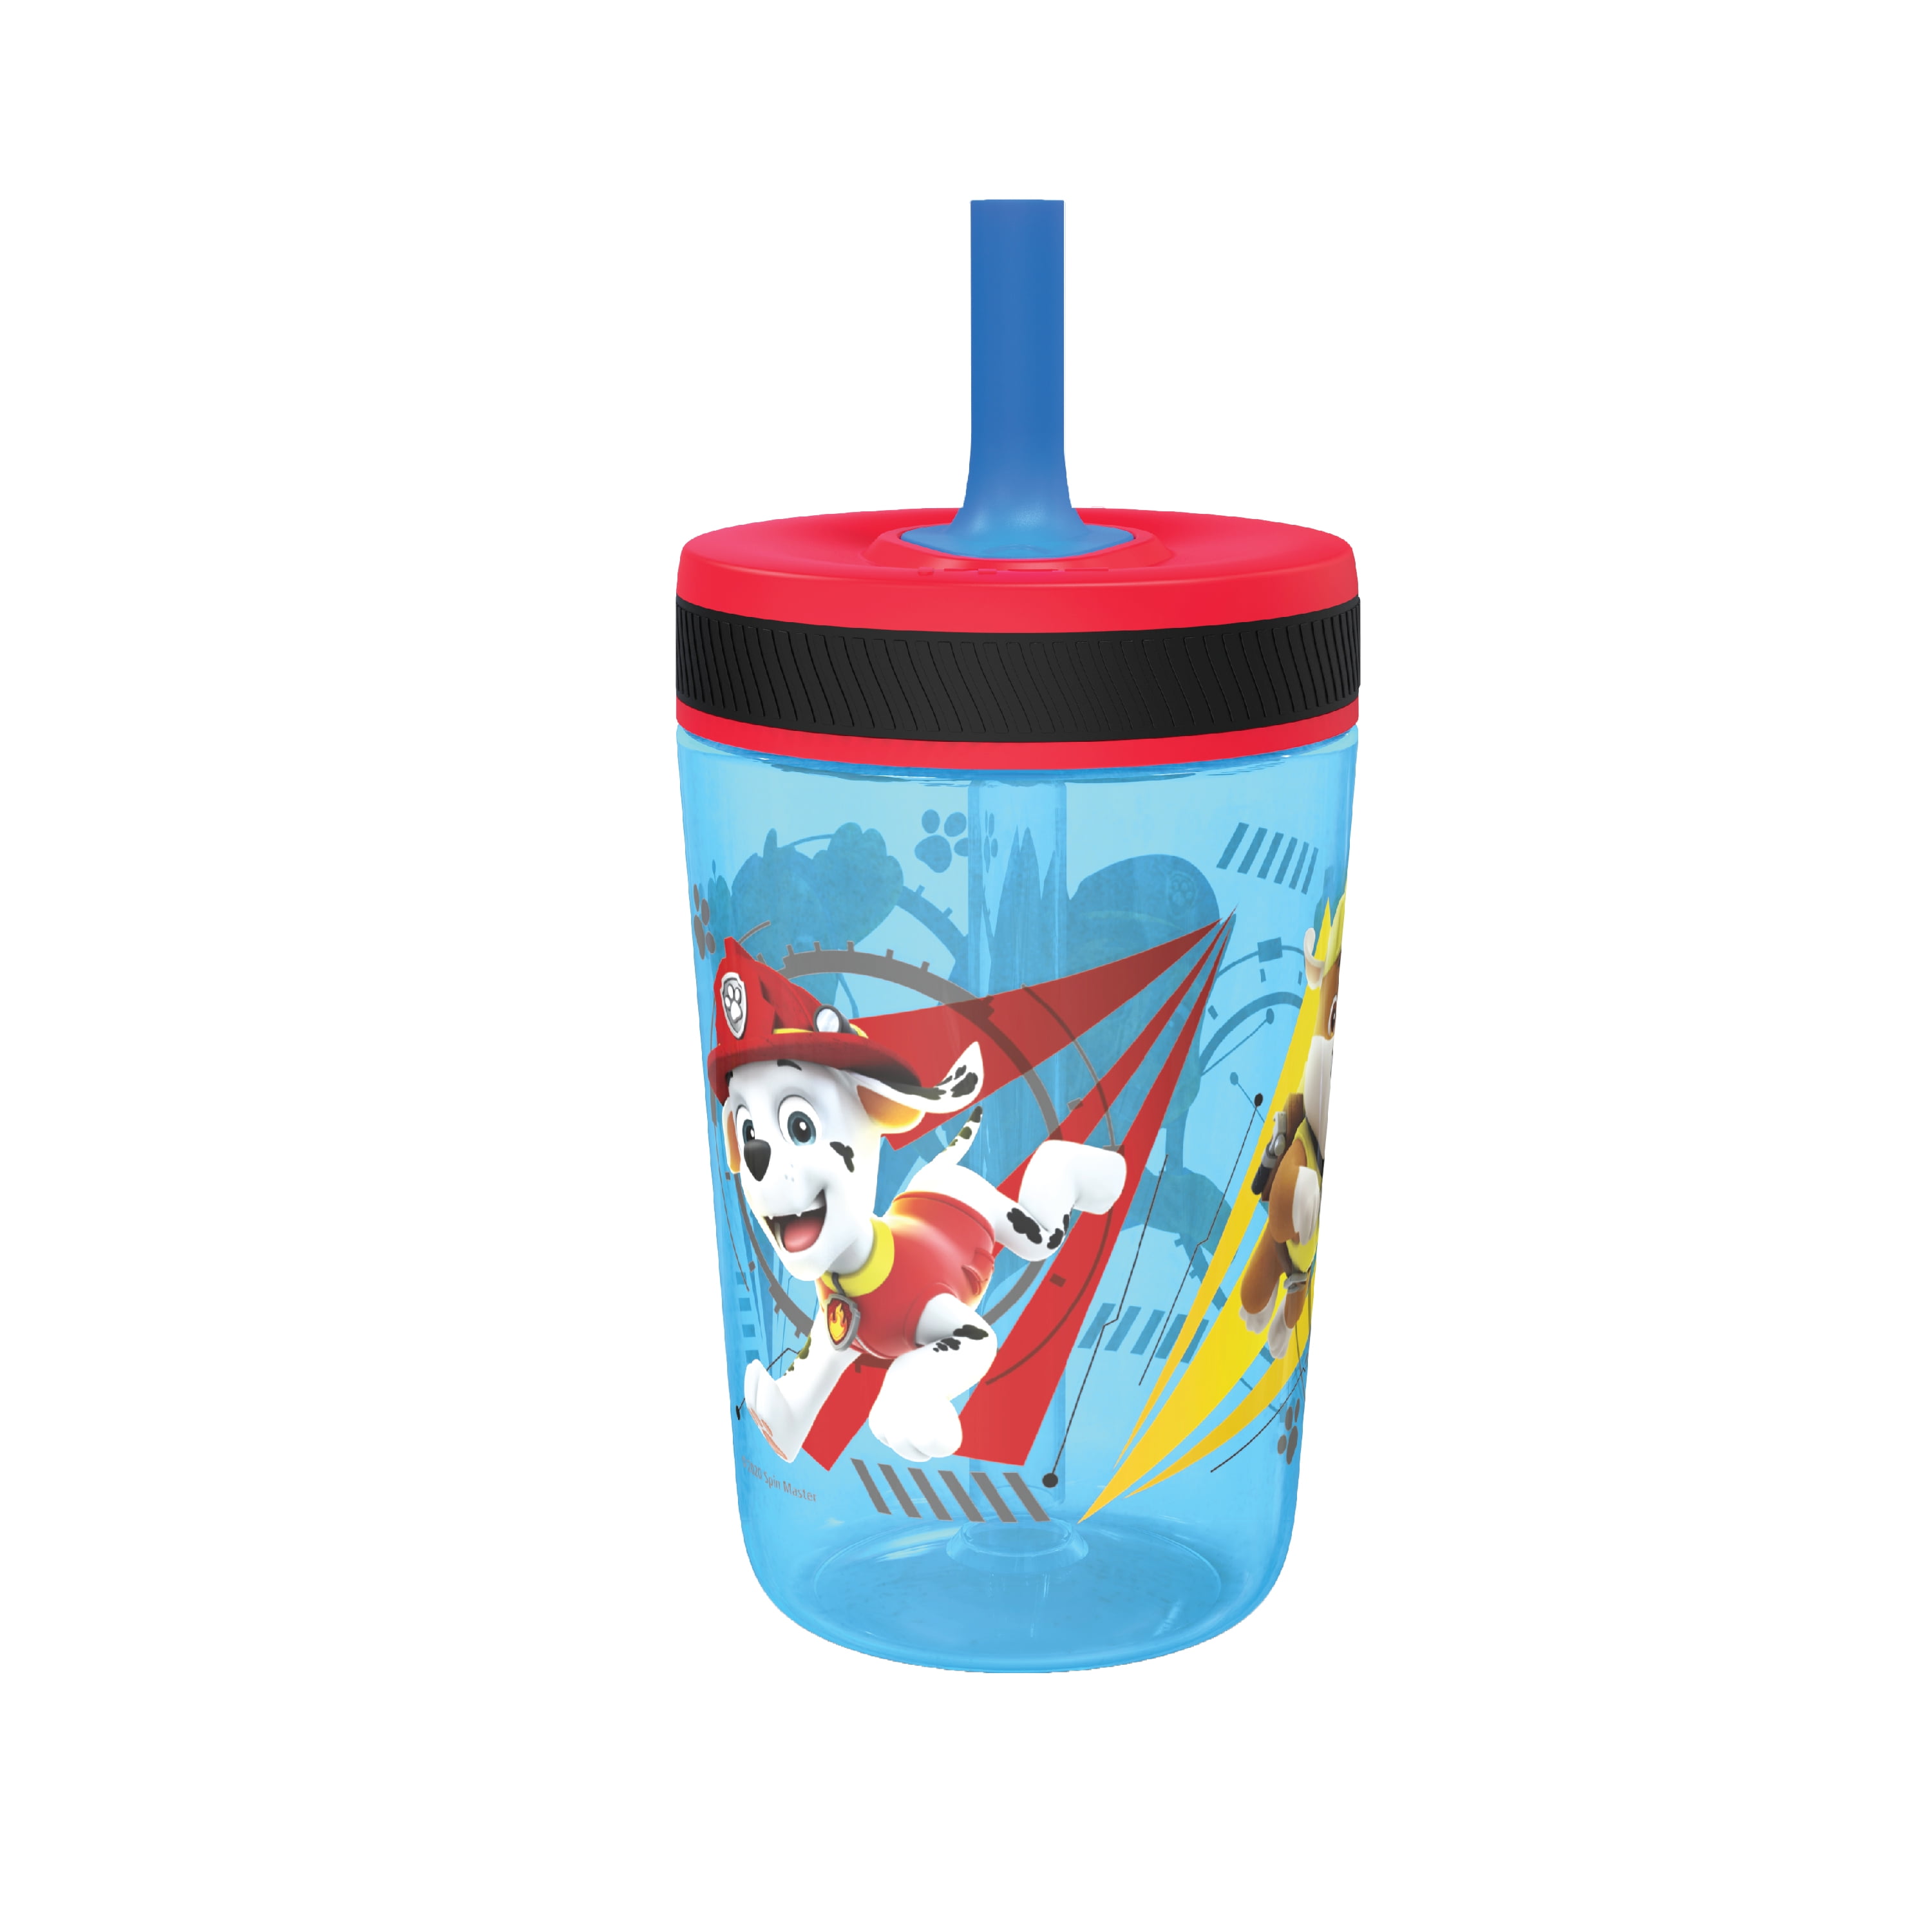 Zak Designs Paw Patrol 15 Ounce Plastic Tumbler with Lid and Straw,  Marshall and Skye, 2-piece set 